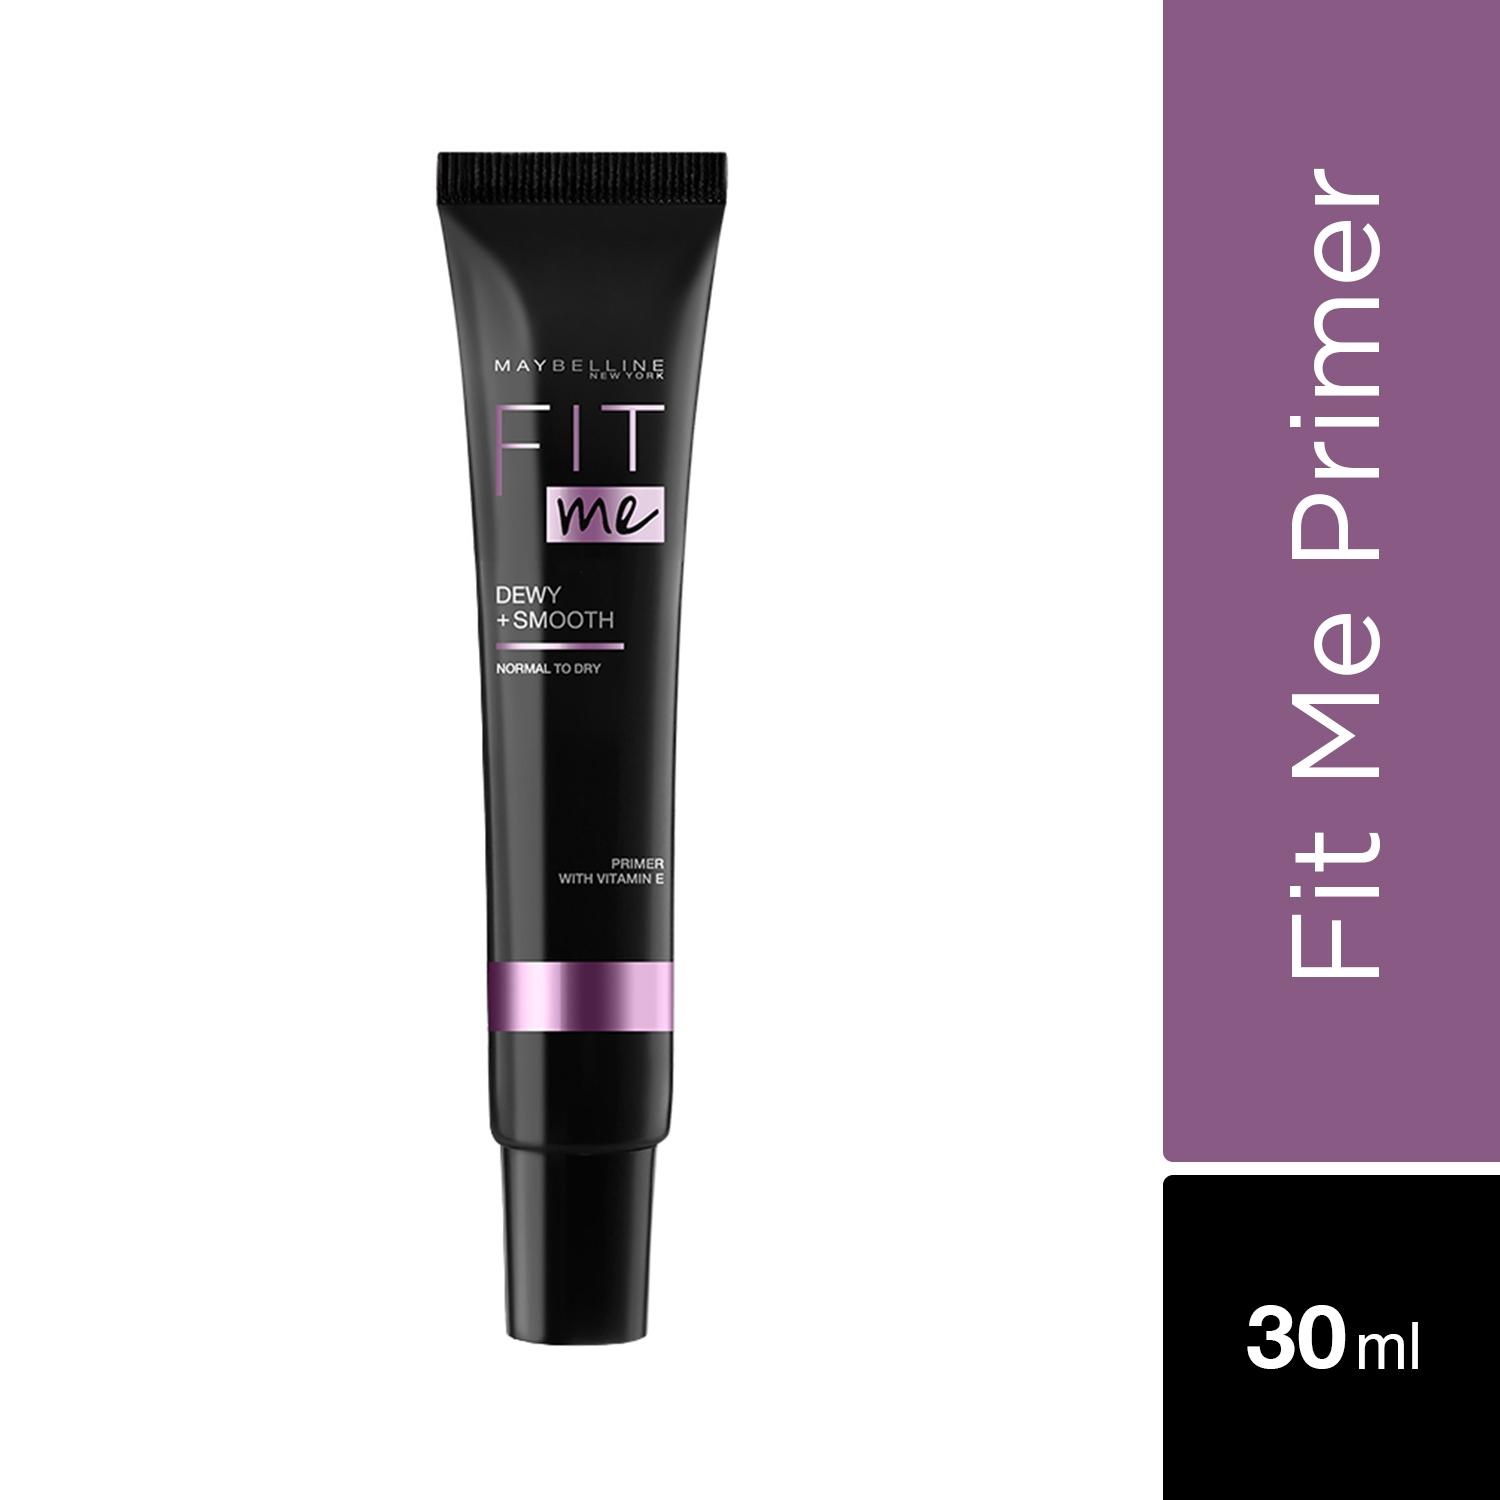 maybelline new york fit me dewy + smooth primer (30ml)